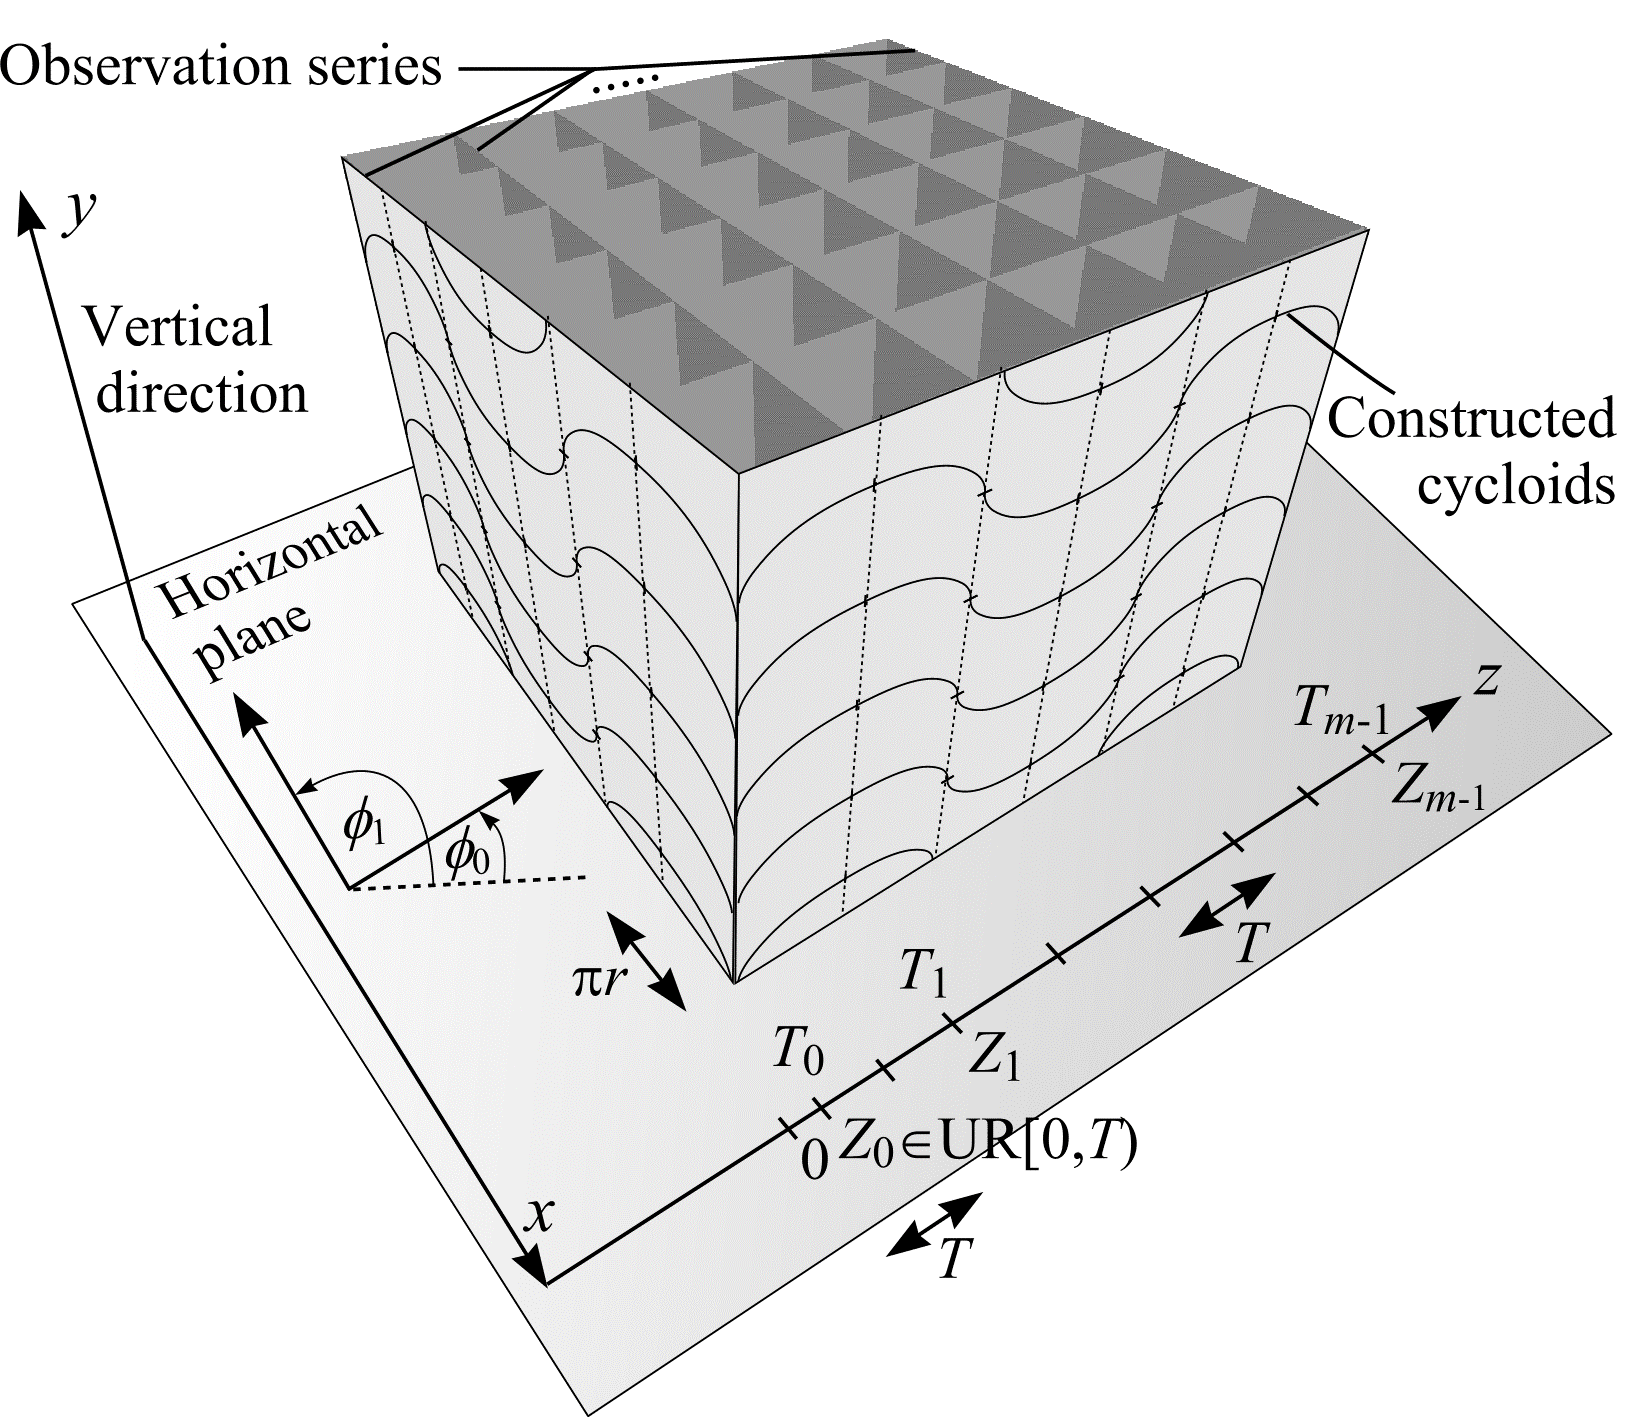 A constructed series of vertical sections perpendicular to the observation series